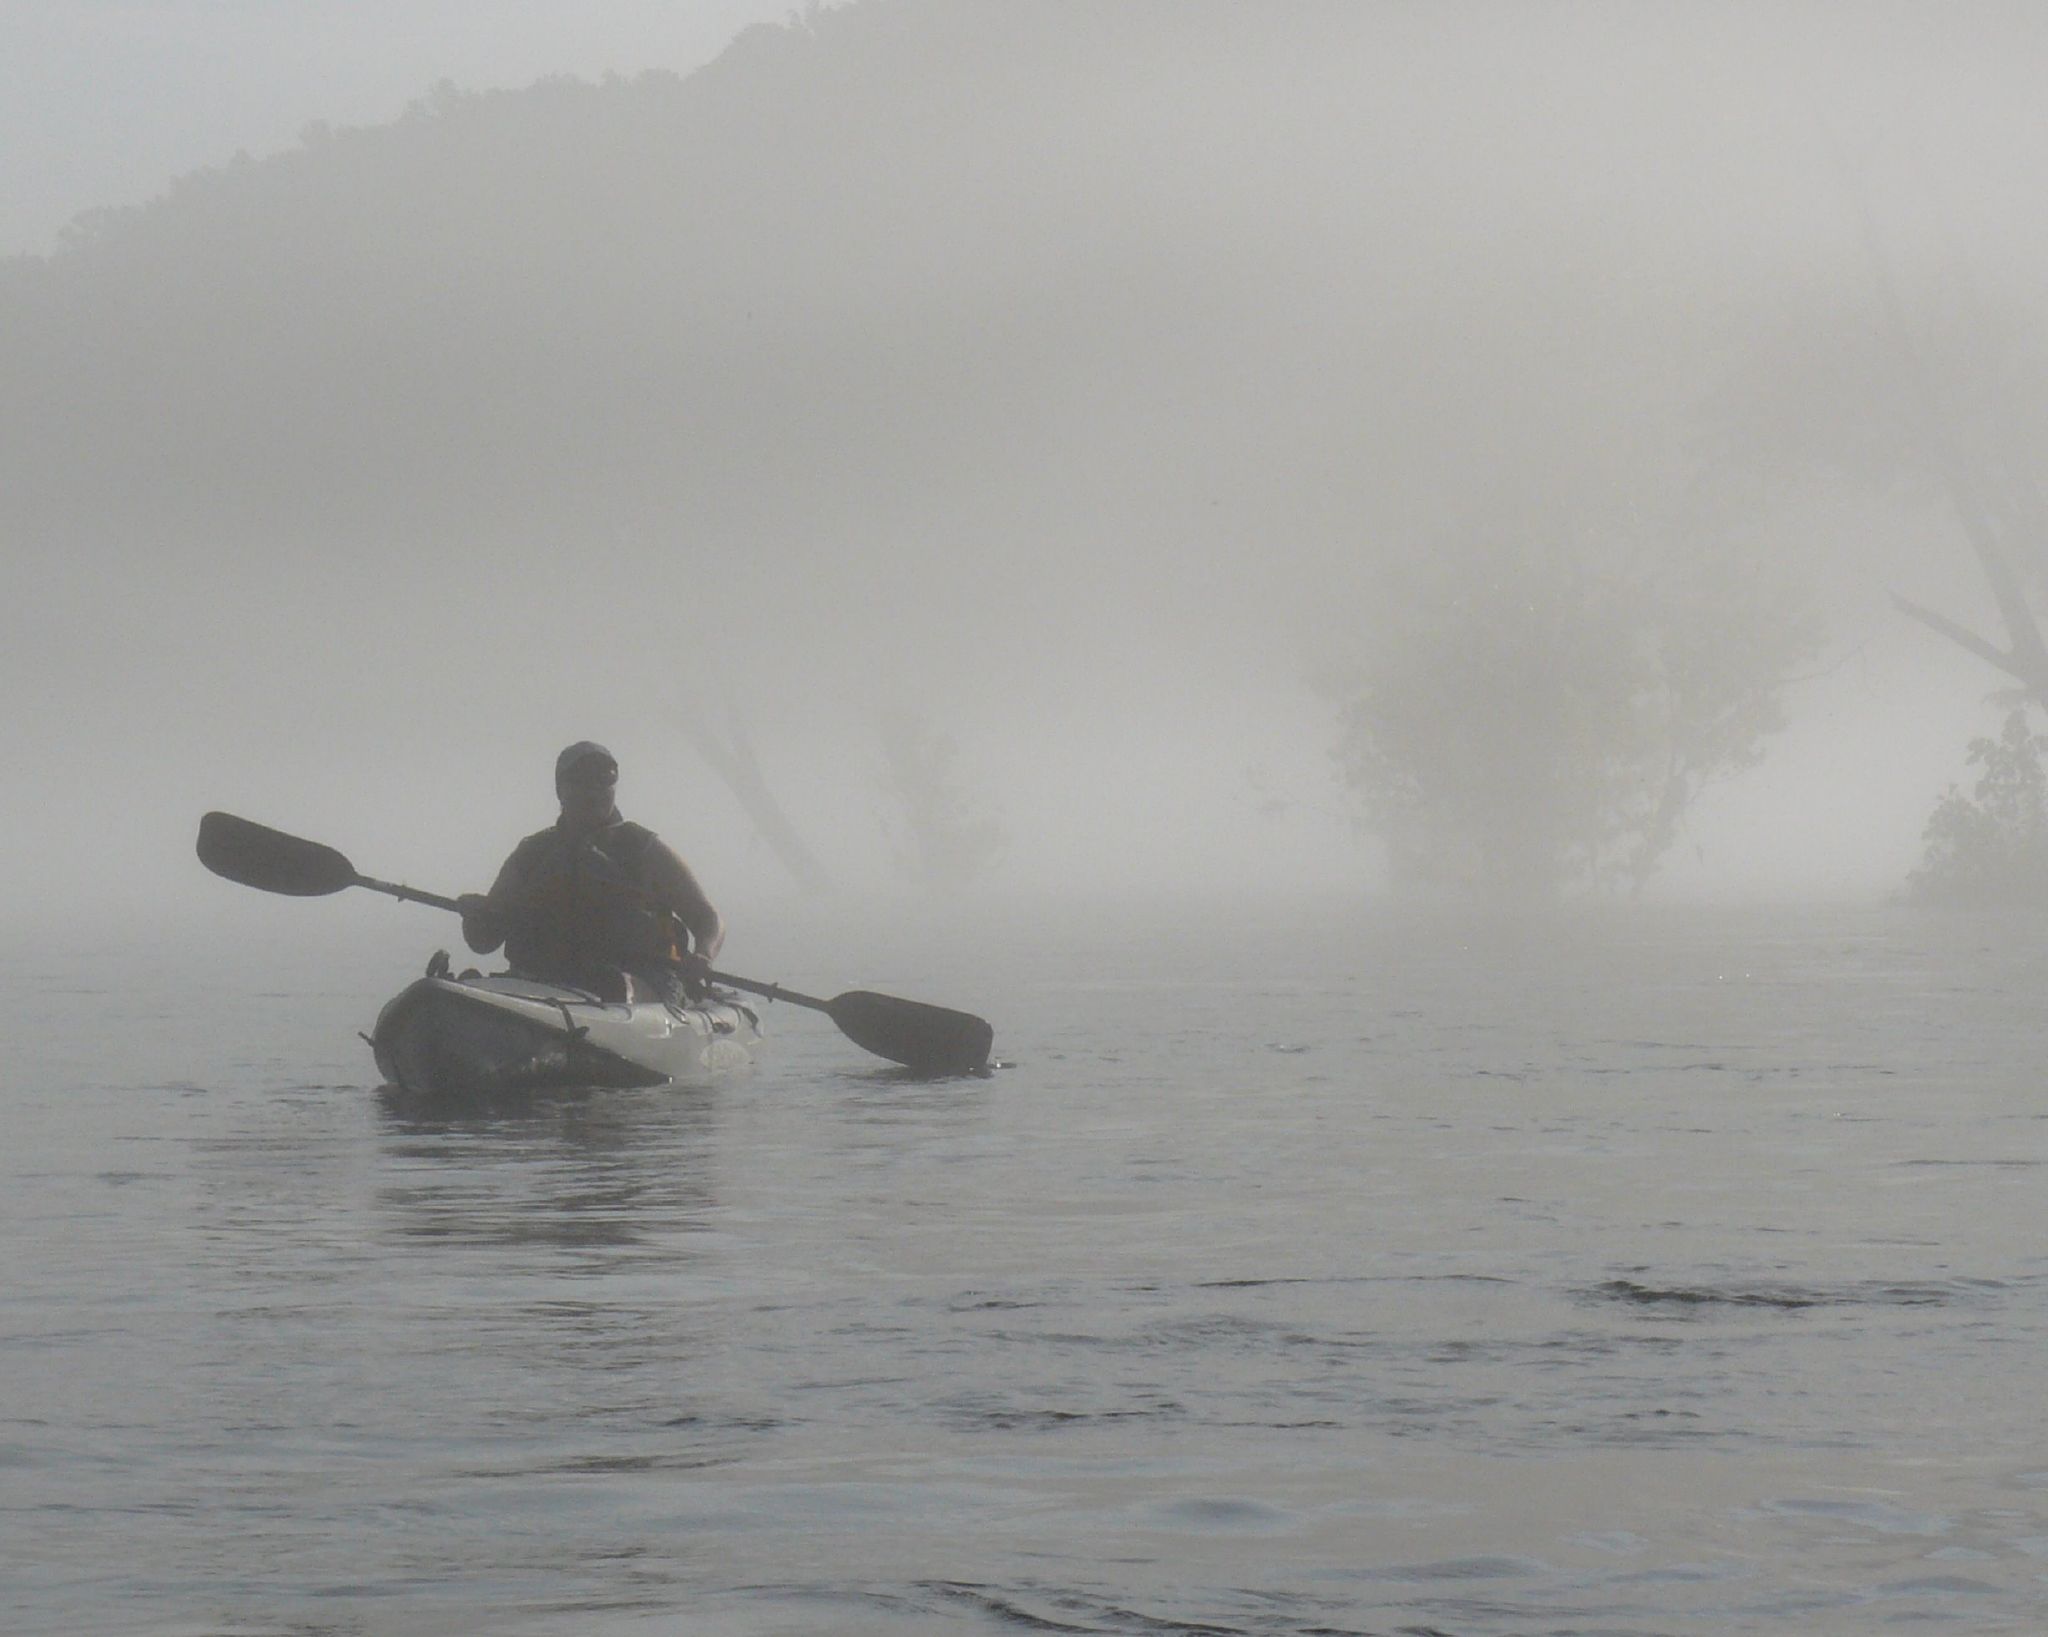 the man is paddling his kayak through the foggy water